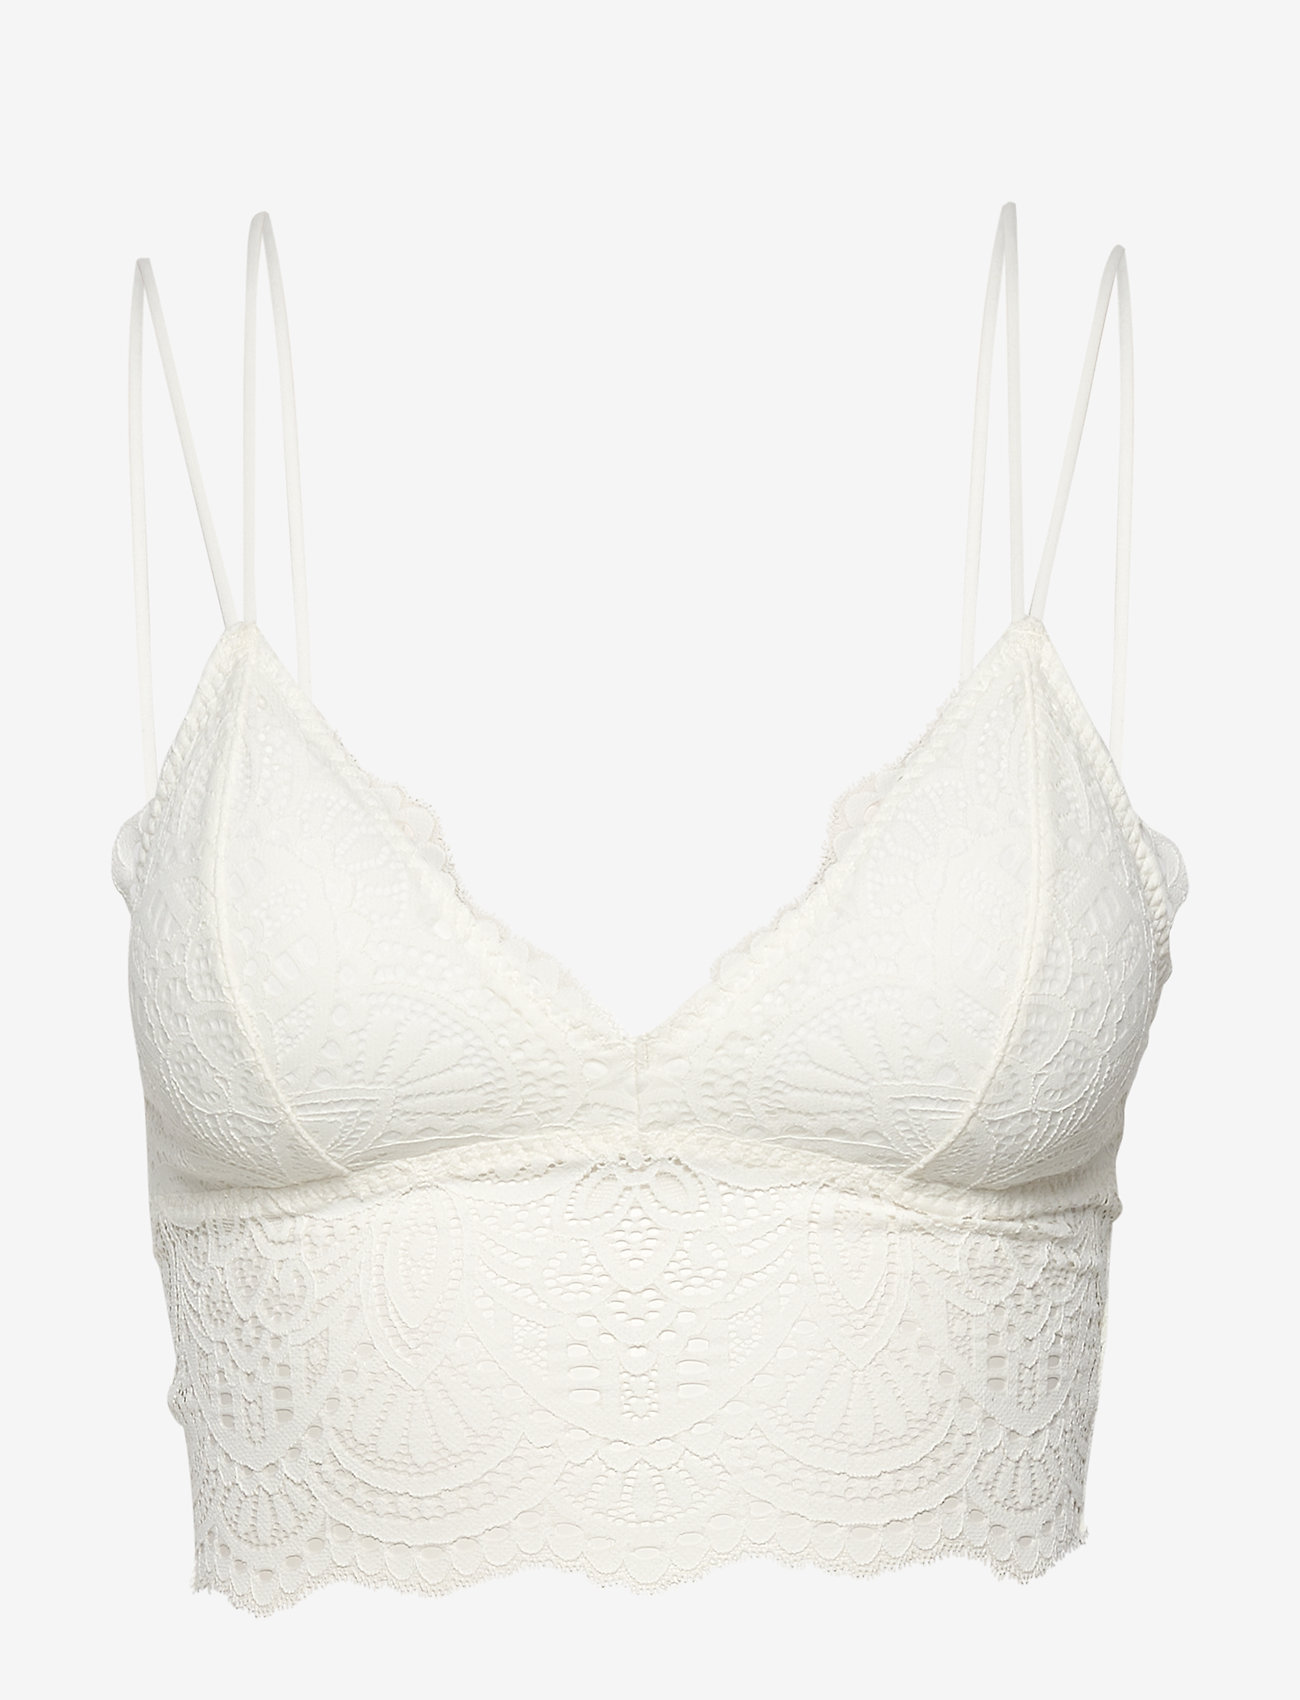 Lace Strappy Longline Bralette White Lace 11340 Kr Gilly Hicks 1173